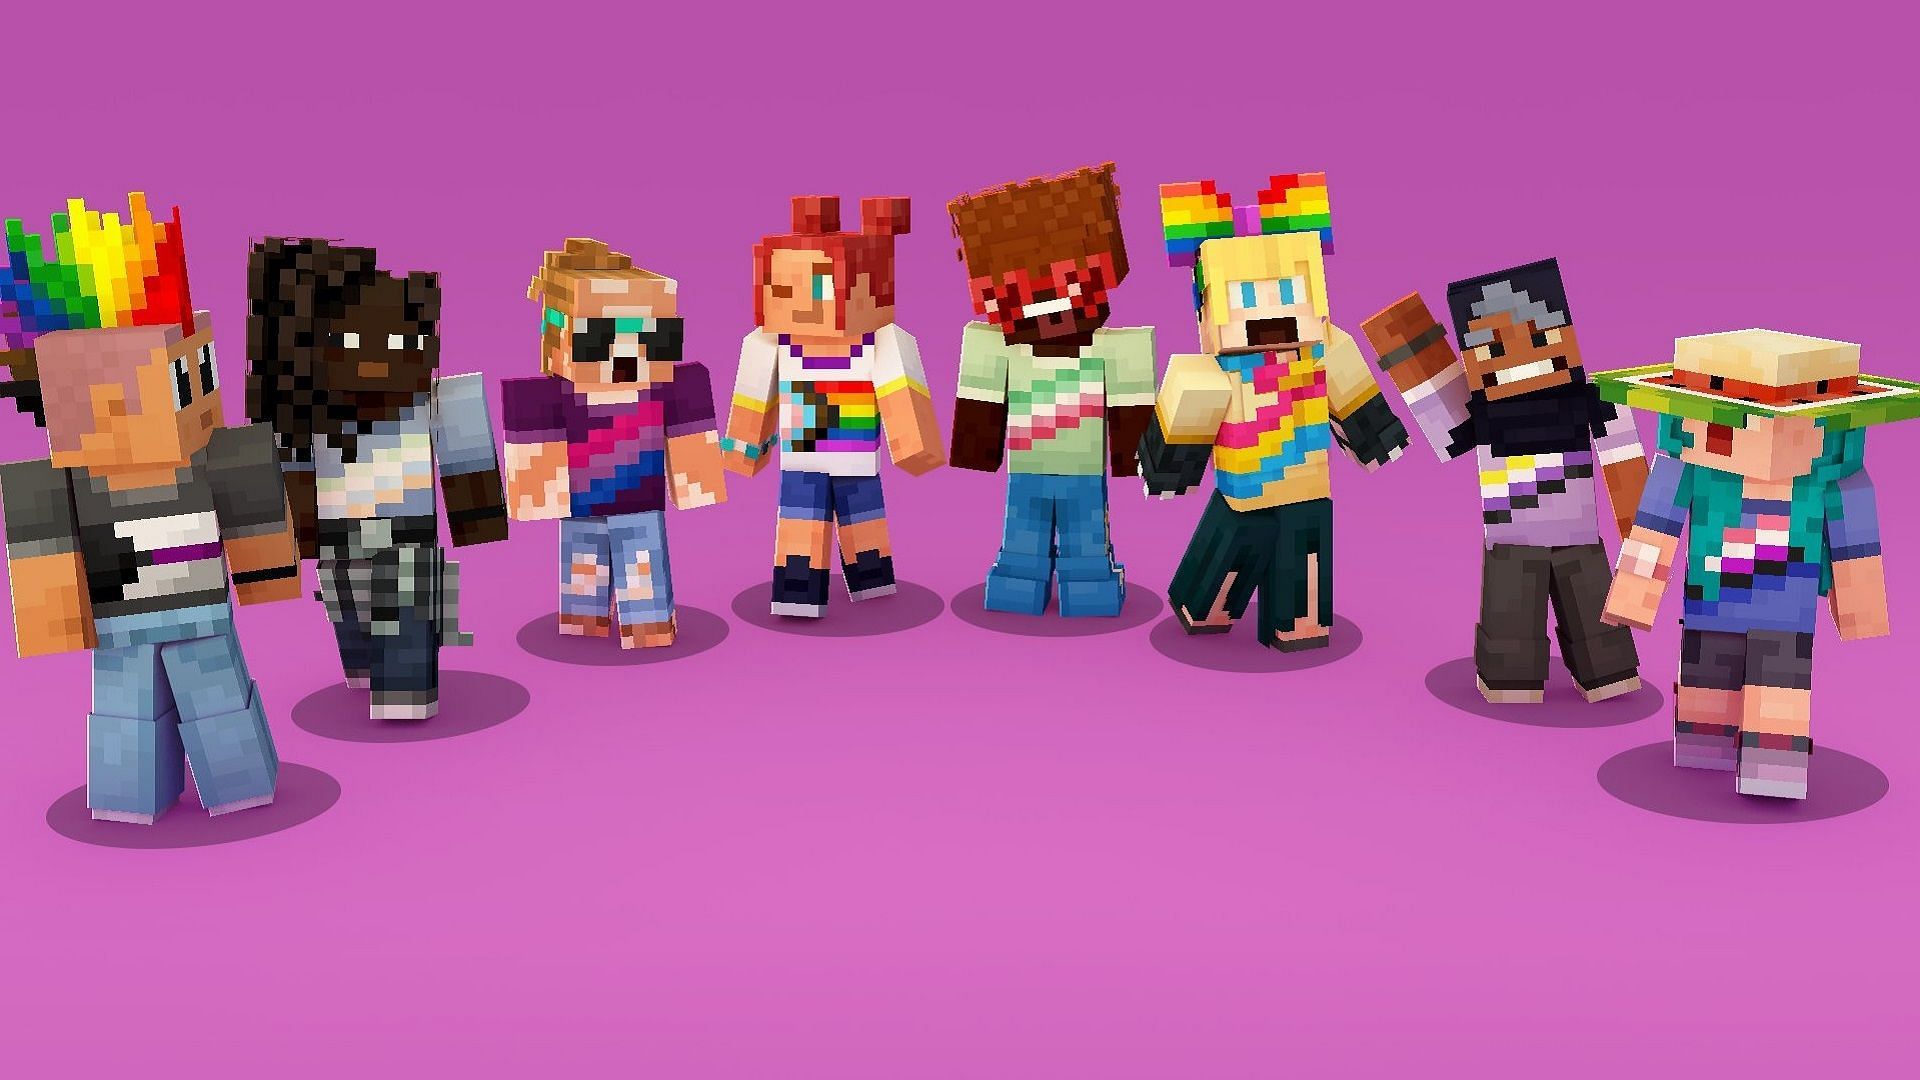 Dozens of new creator items are now available for free in Minecraft Bedrock for the LGBTQIA+ community (Image via Mojang)